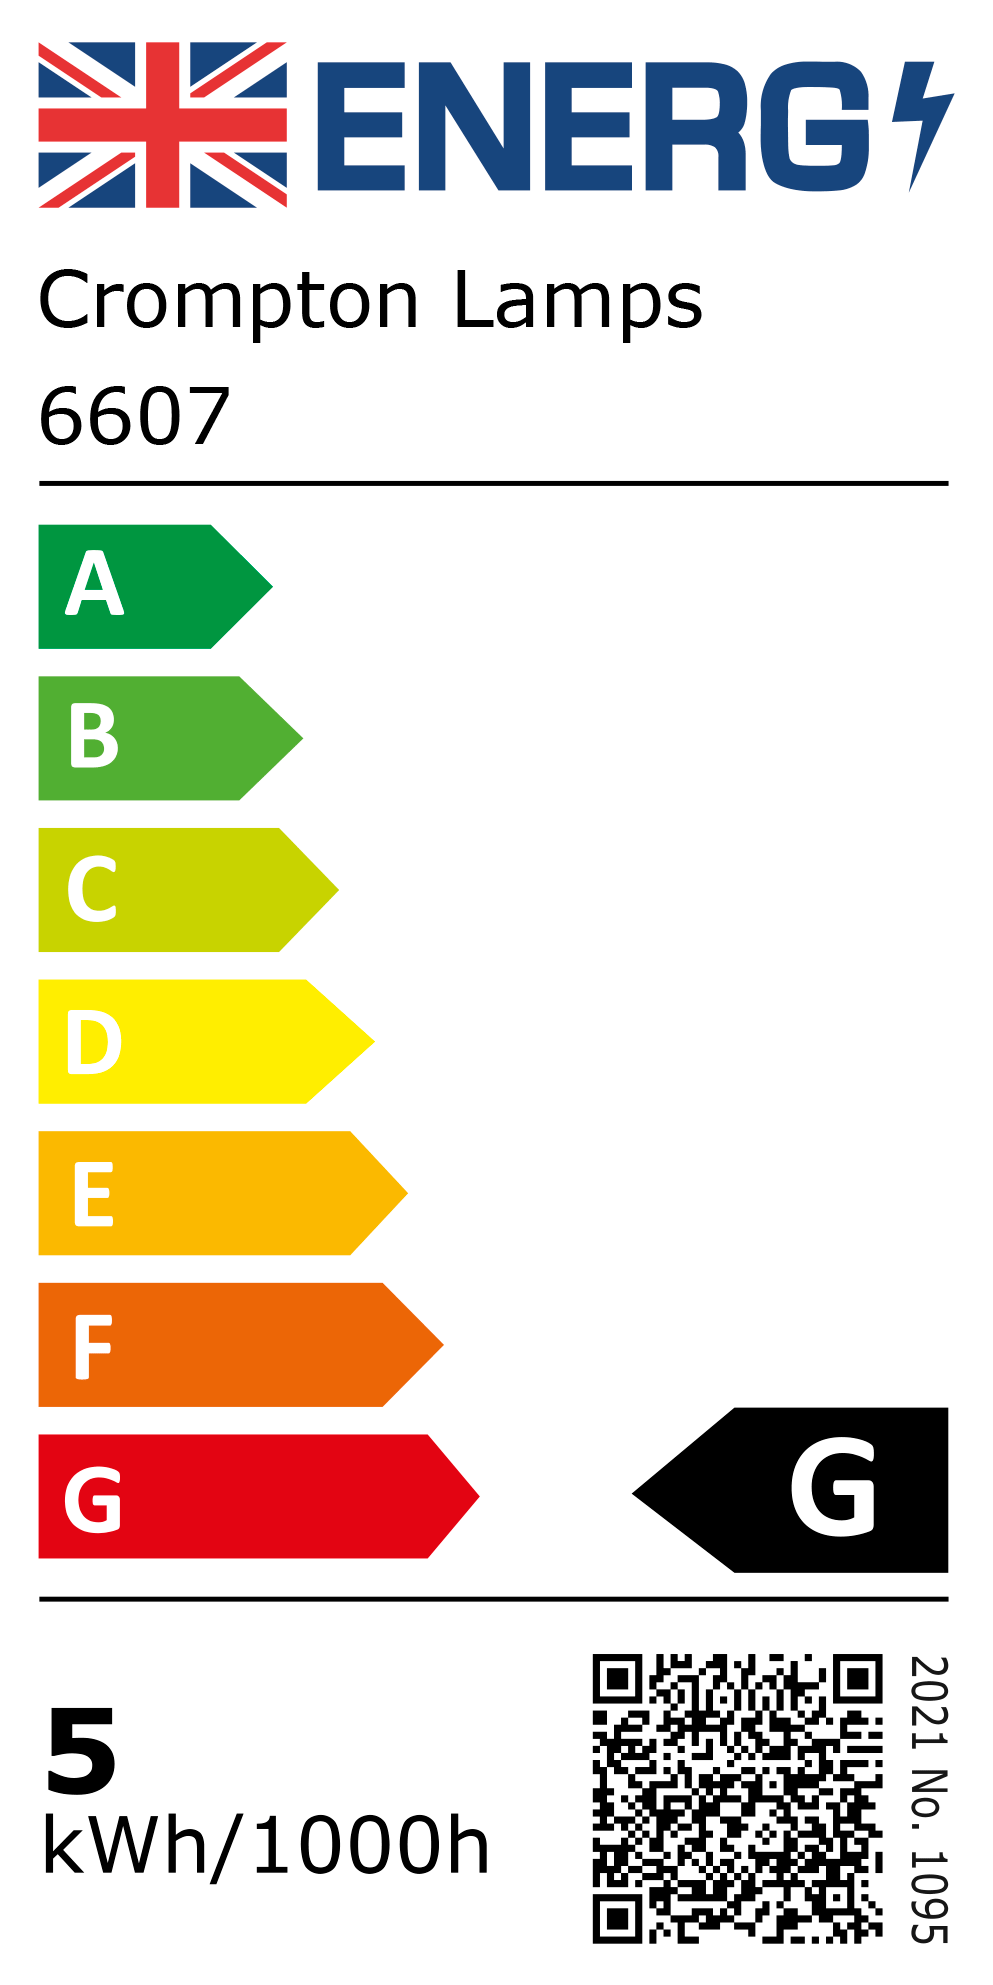 New 2021 Energy Rating Label: Stock Code 6607